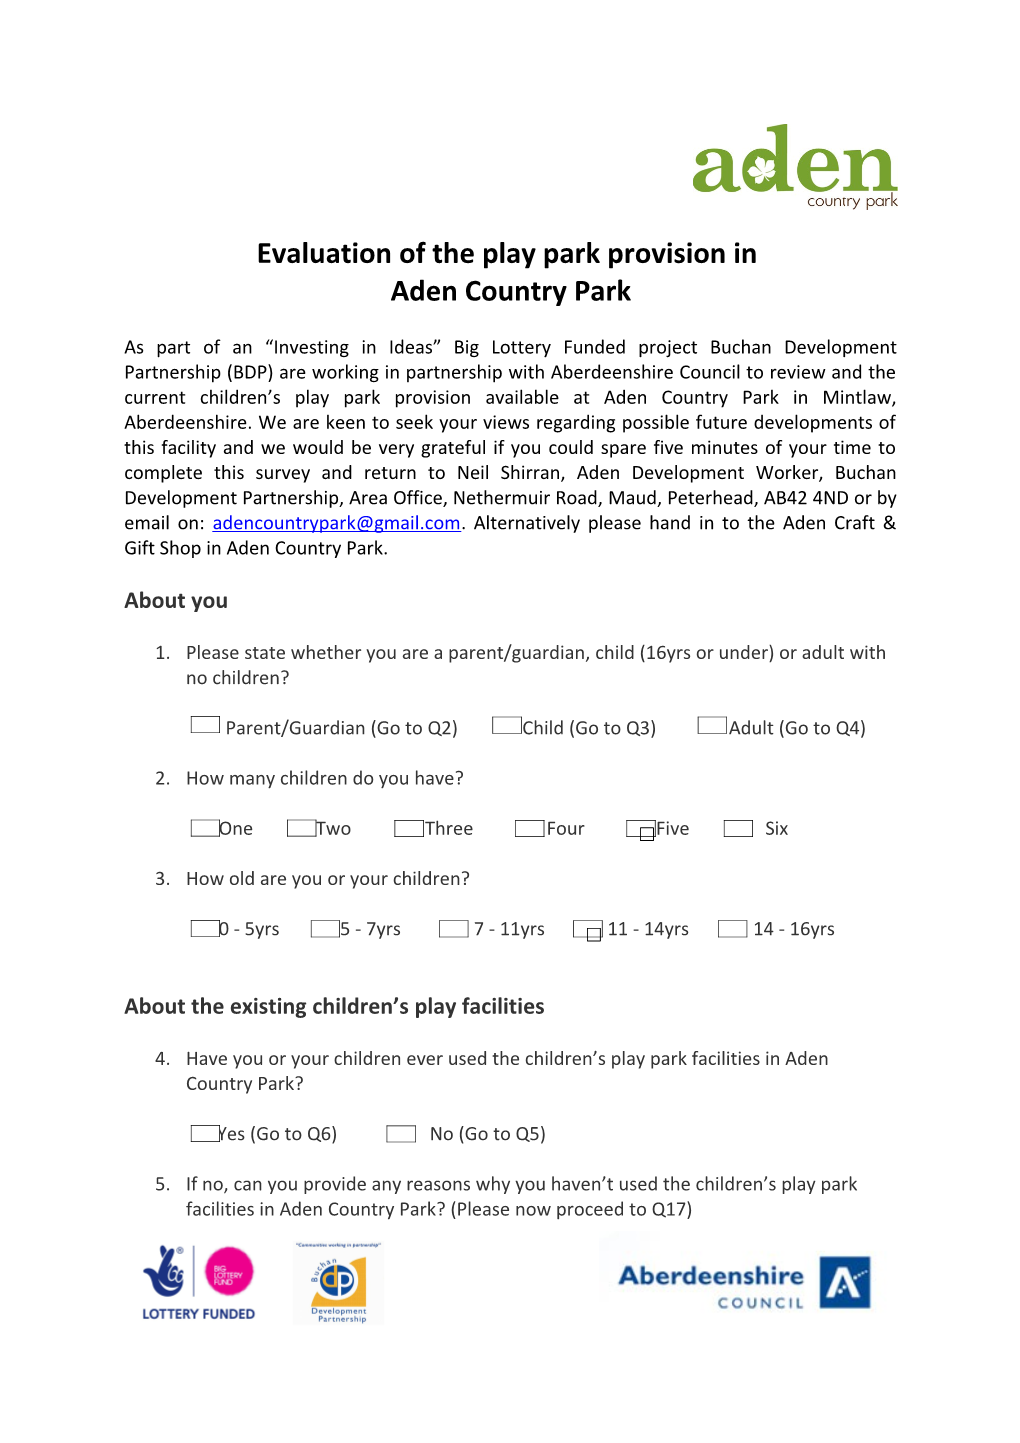 Evaluation of the Play Park Provision In